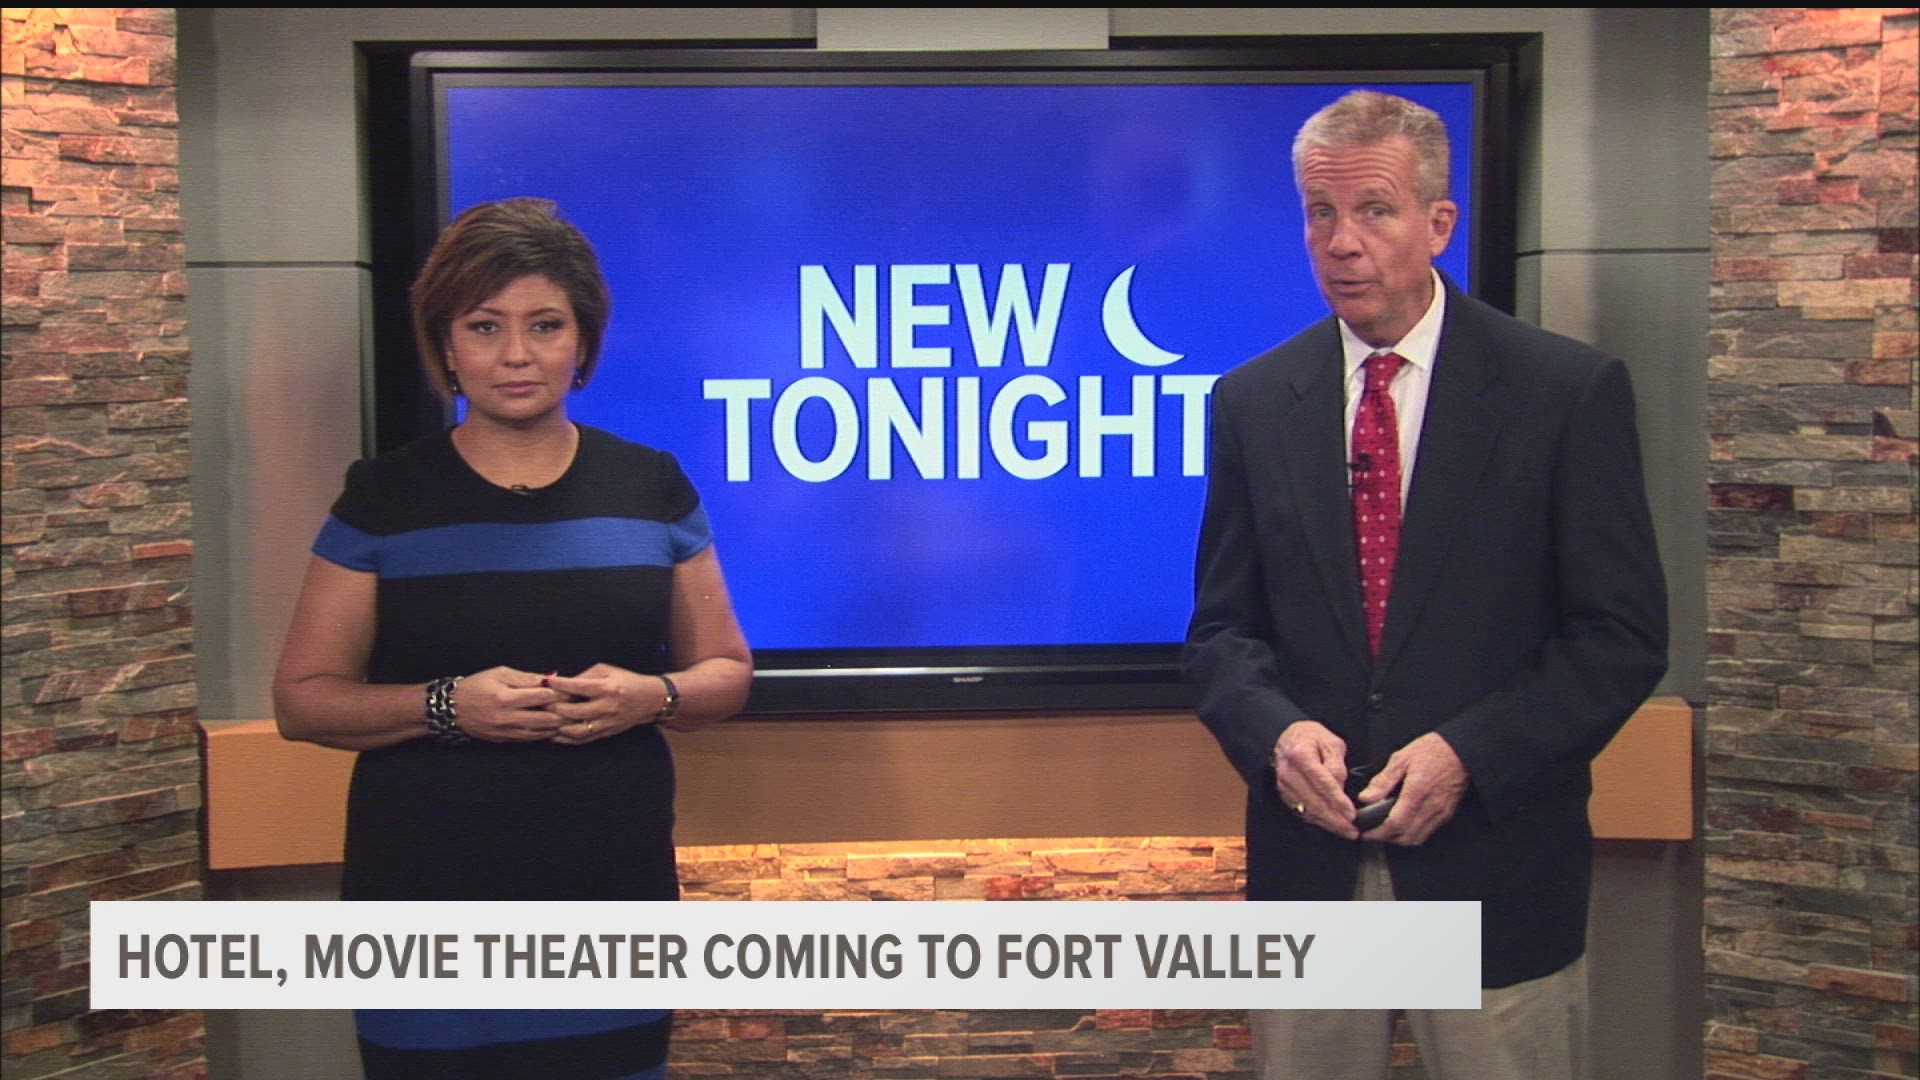 New Fort Valley hotel and movie theater in final planning stages